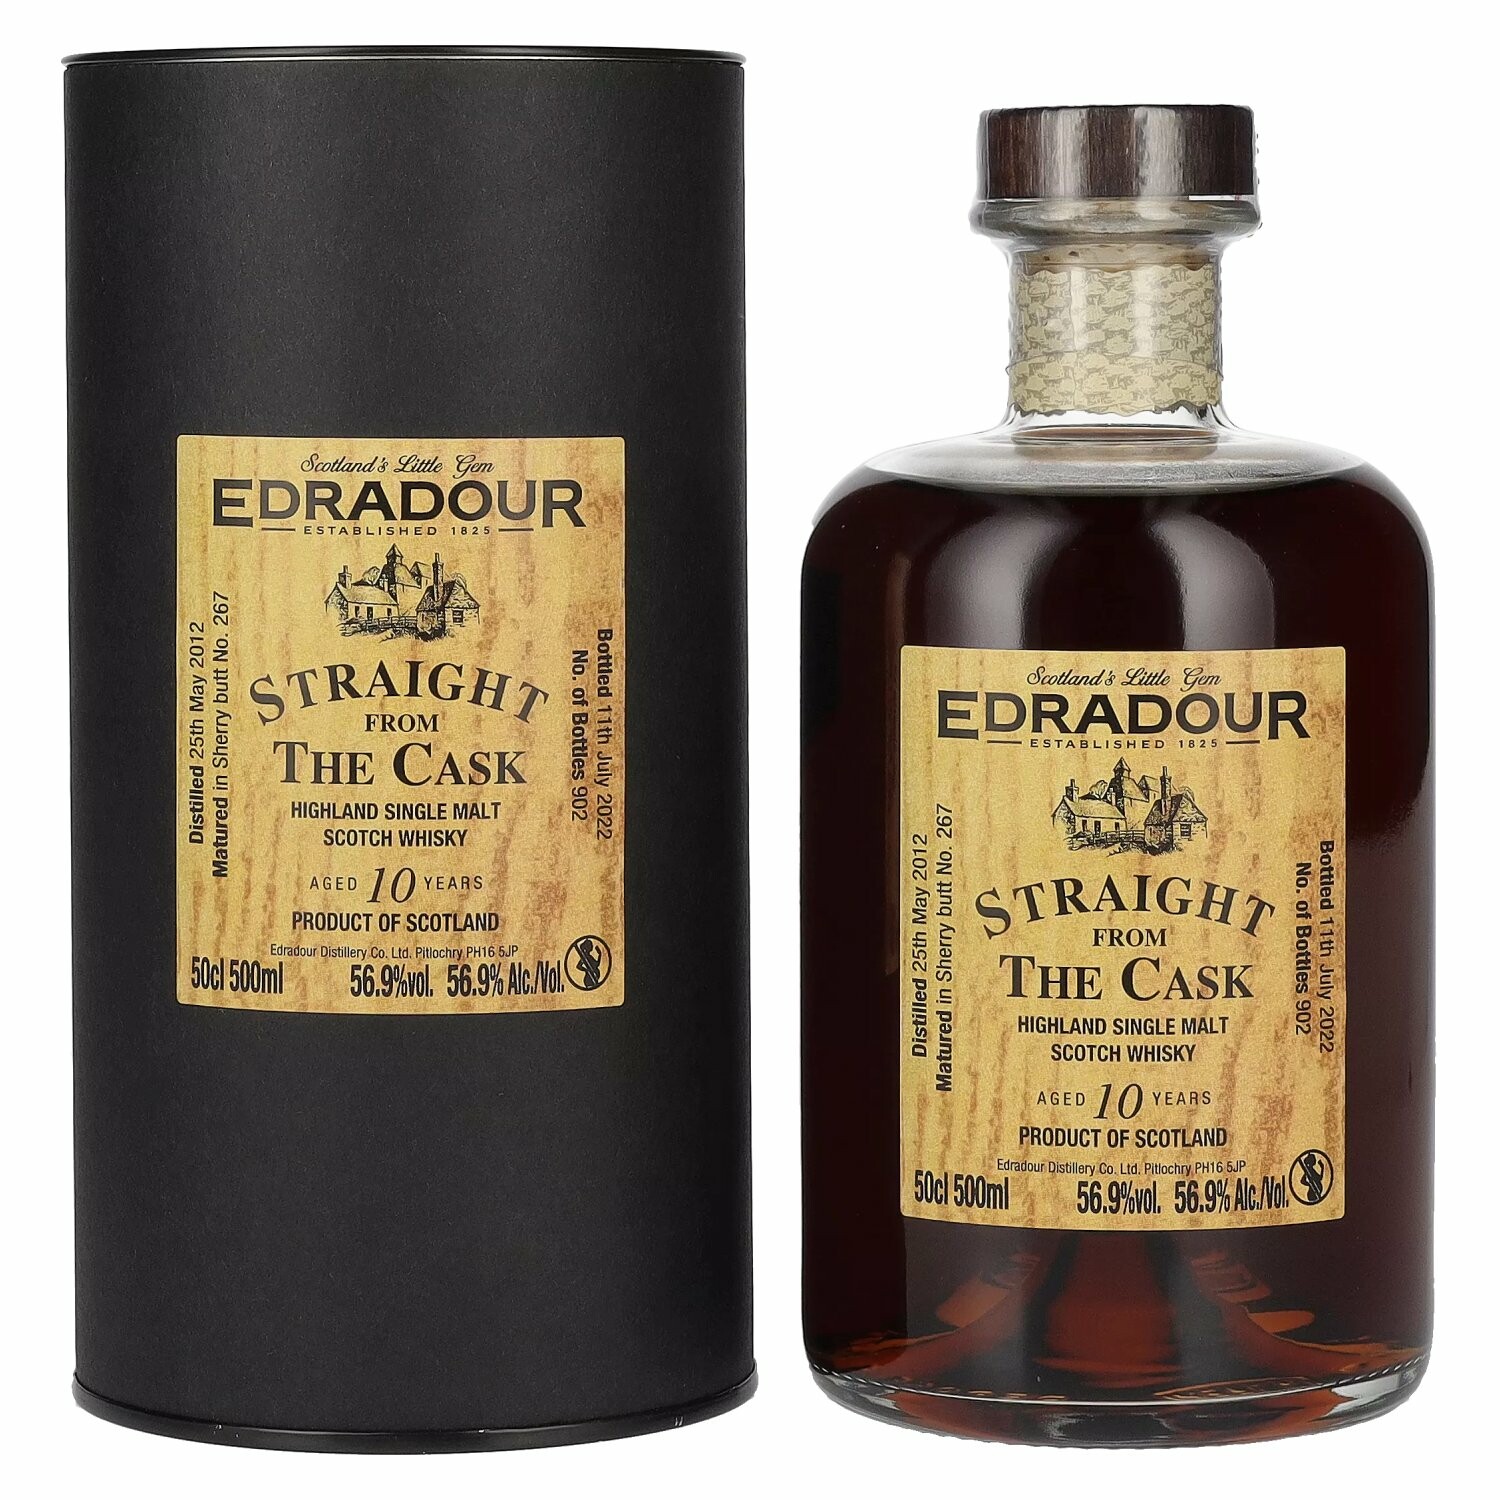 Edradour Ballechin SFTC 10 Years Old Sherry Butt 2012 56,9% Vol. 0,5l in Giftbox